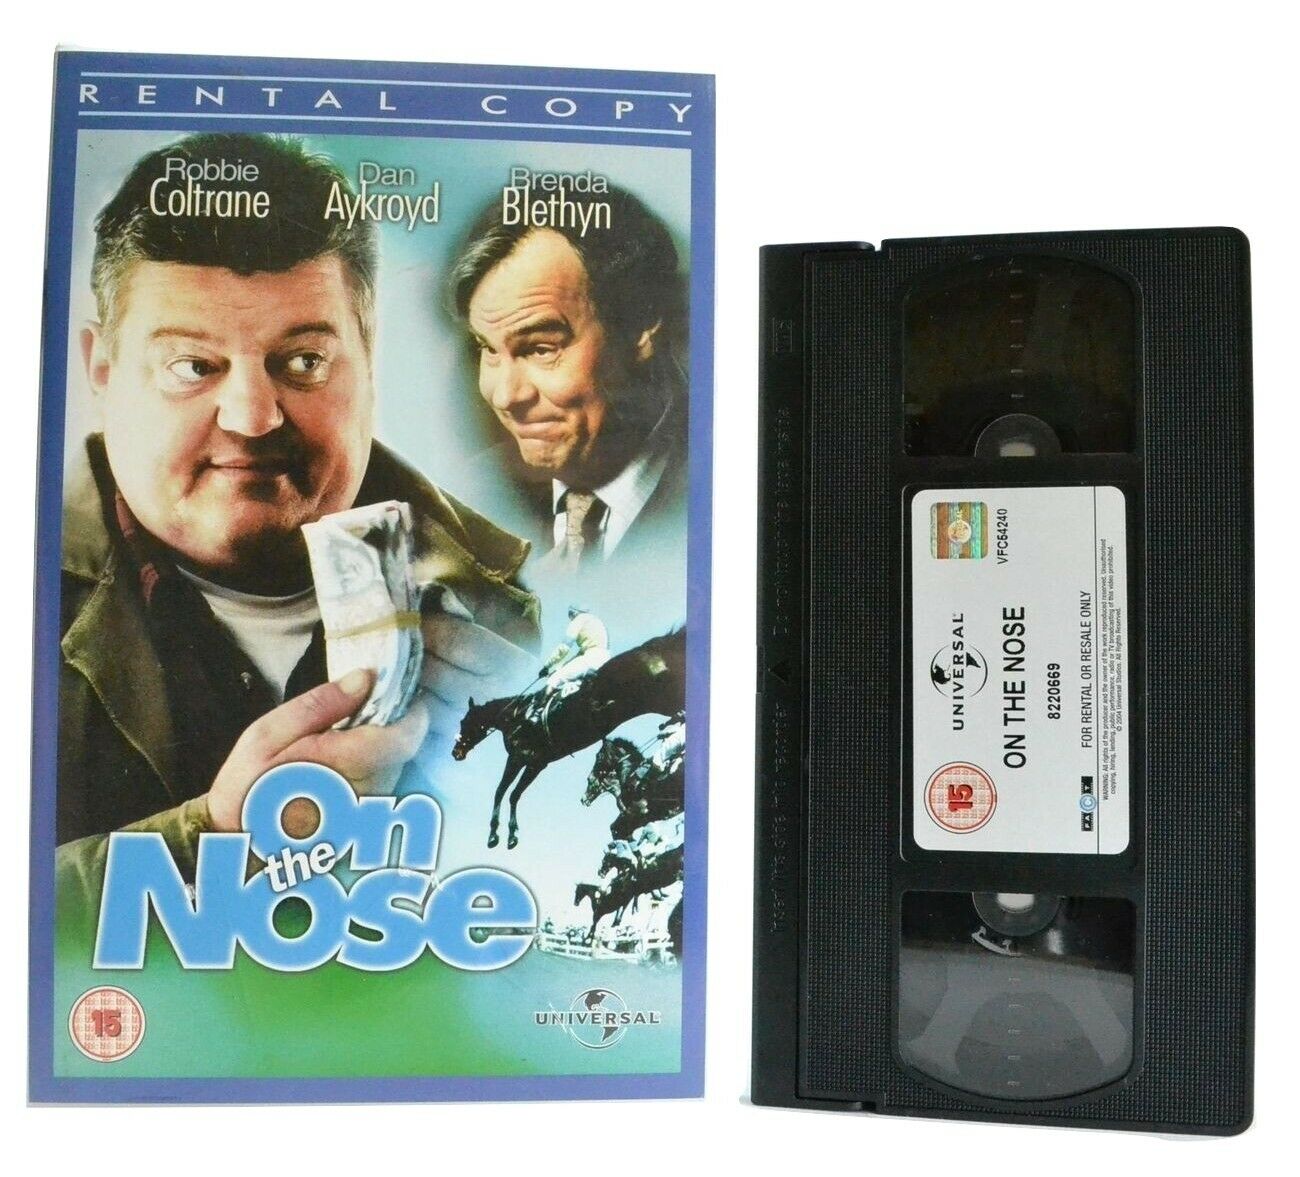 On The Nose: R.Coltrane/D.Aykroyd - Comedy (2001) - Large Box - Ex-Rental - VHS-